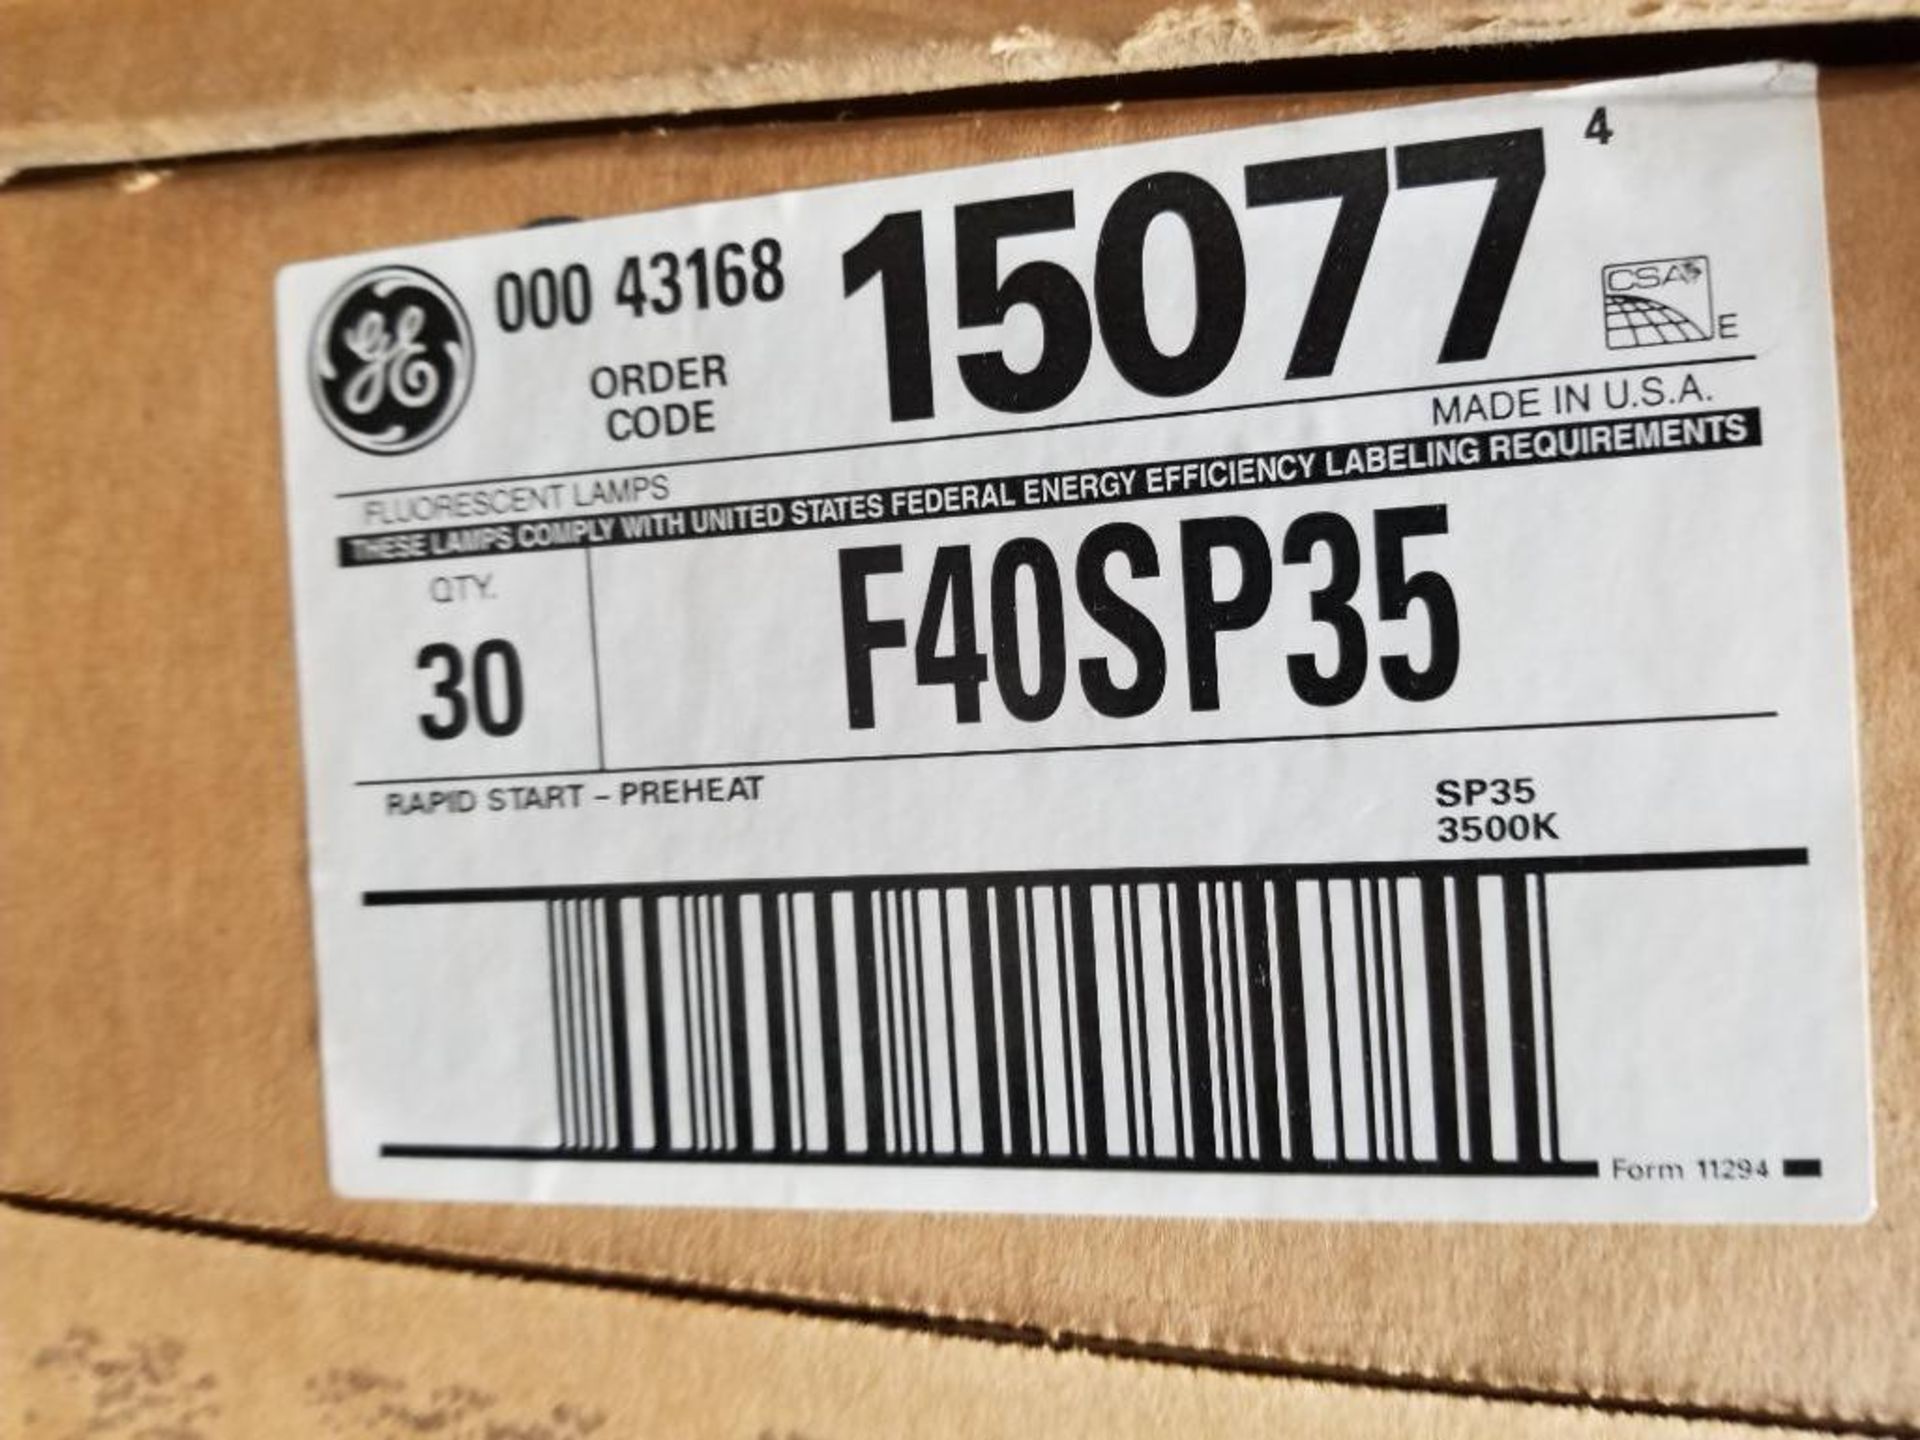 Qty 180 - GE bulbs. Part number F40SP35. - Image 4 of 4